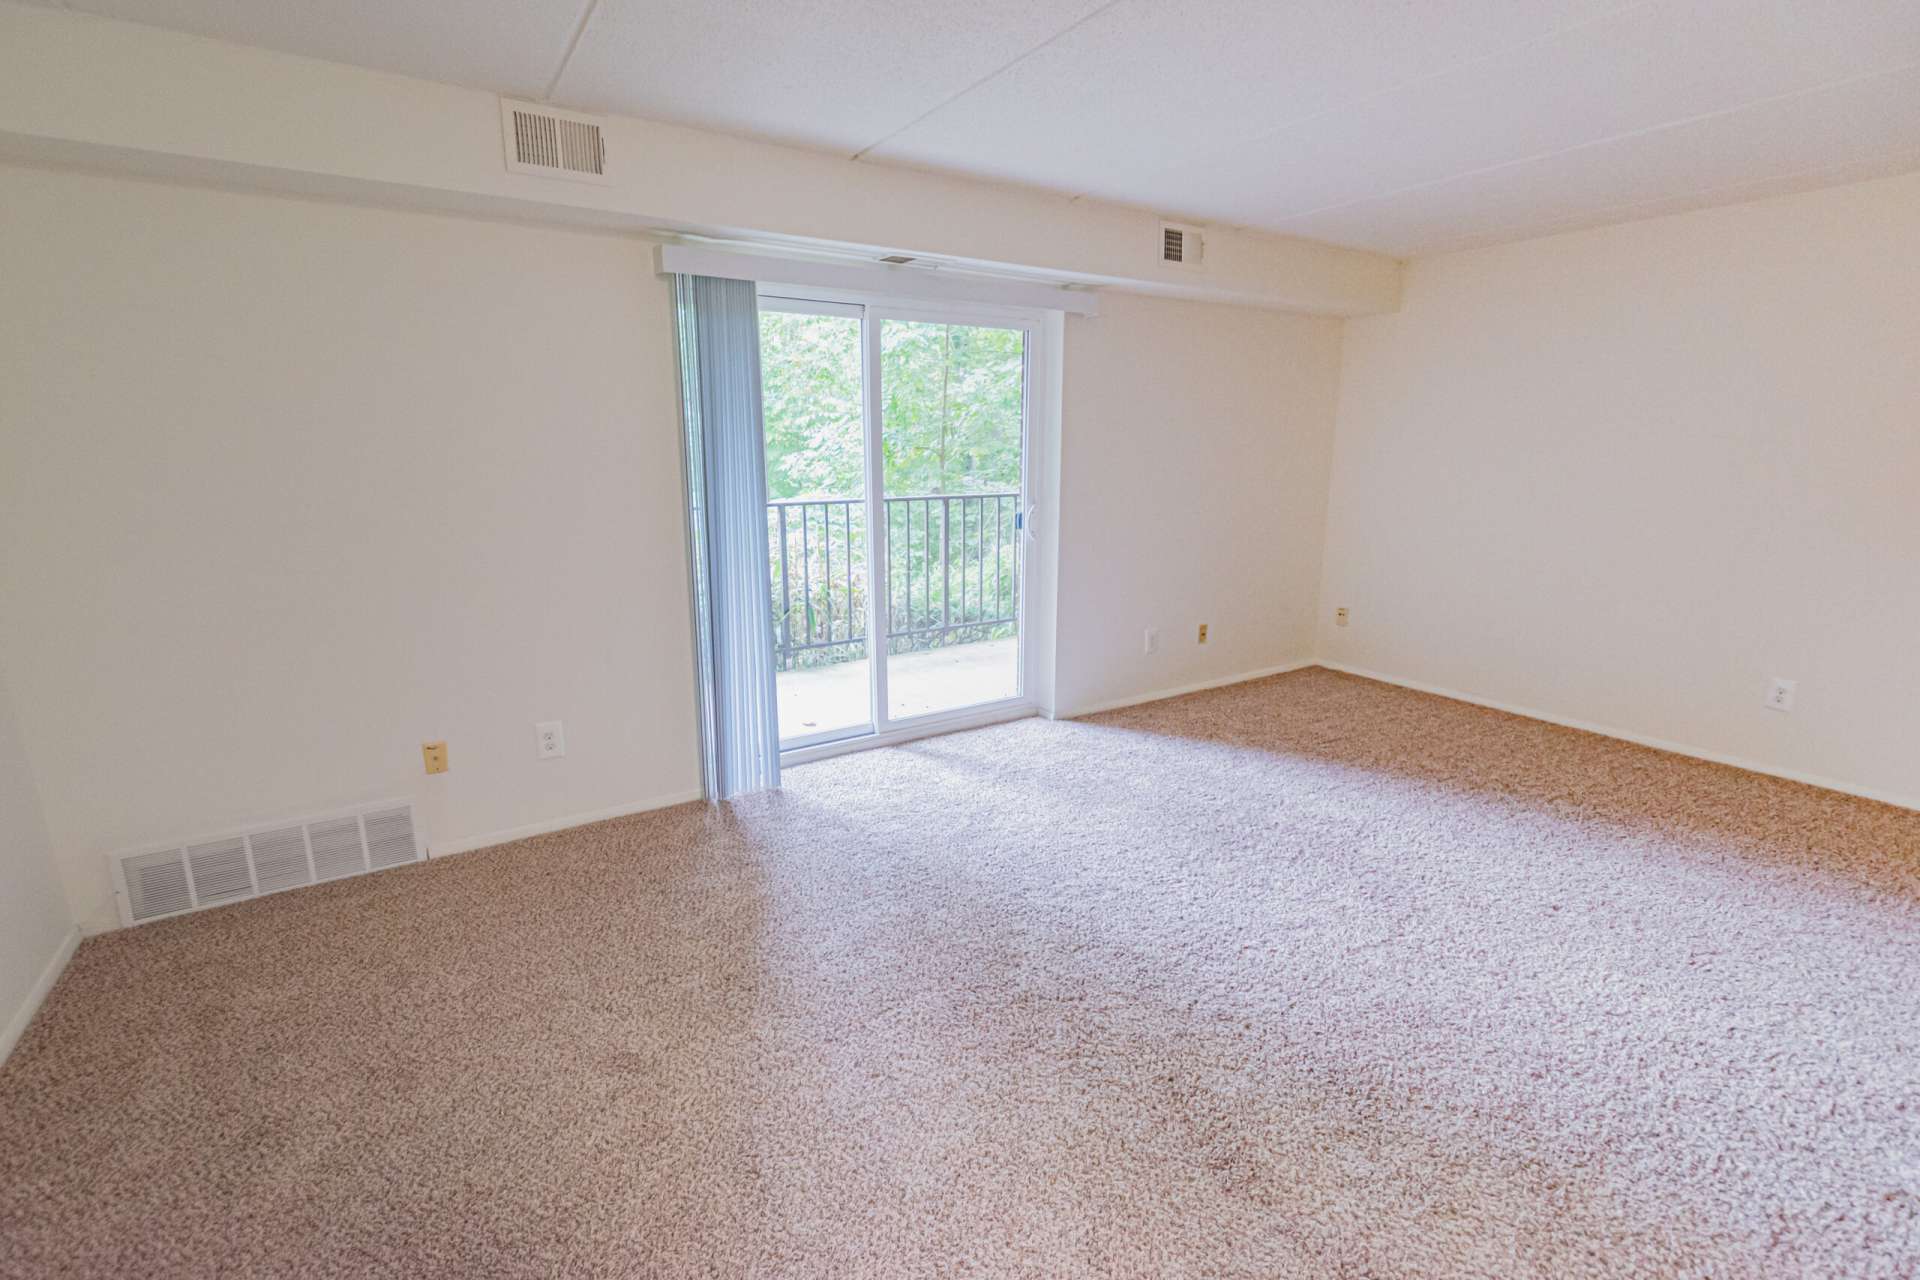 Spacious living room area with beige carpets and sliding glass doors that lead to the balcony.